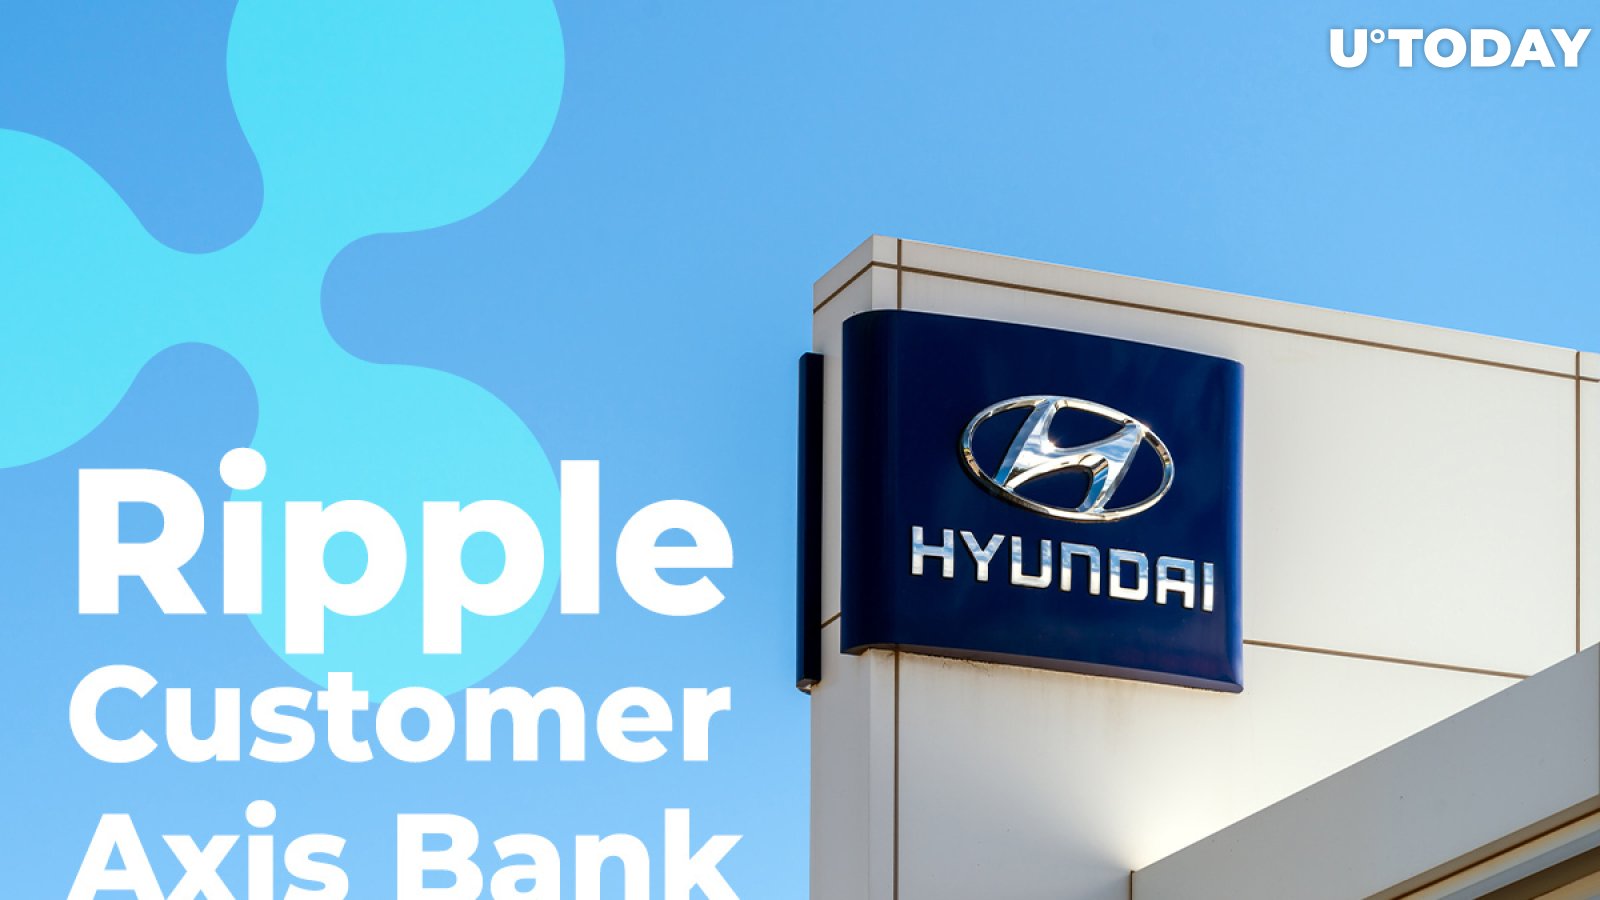 Hyundai Subsidiary Partners with Ripple Customer Axis Bank to Launch Digital Financial Solutions